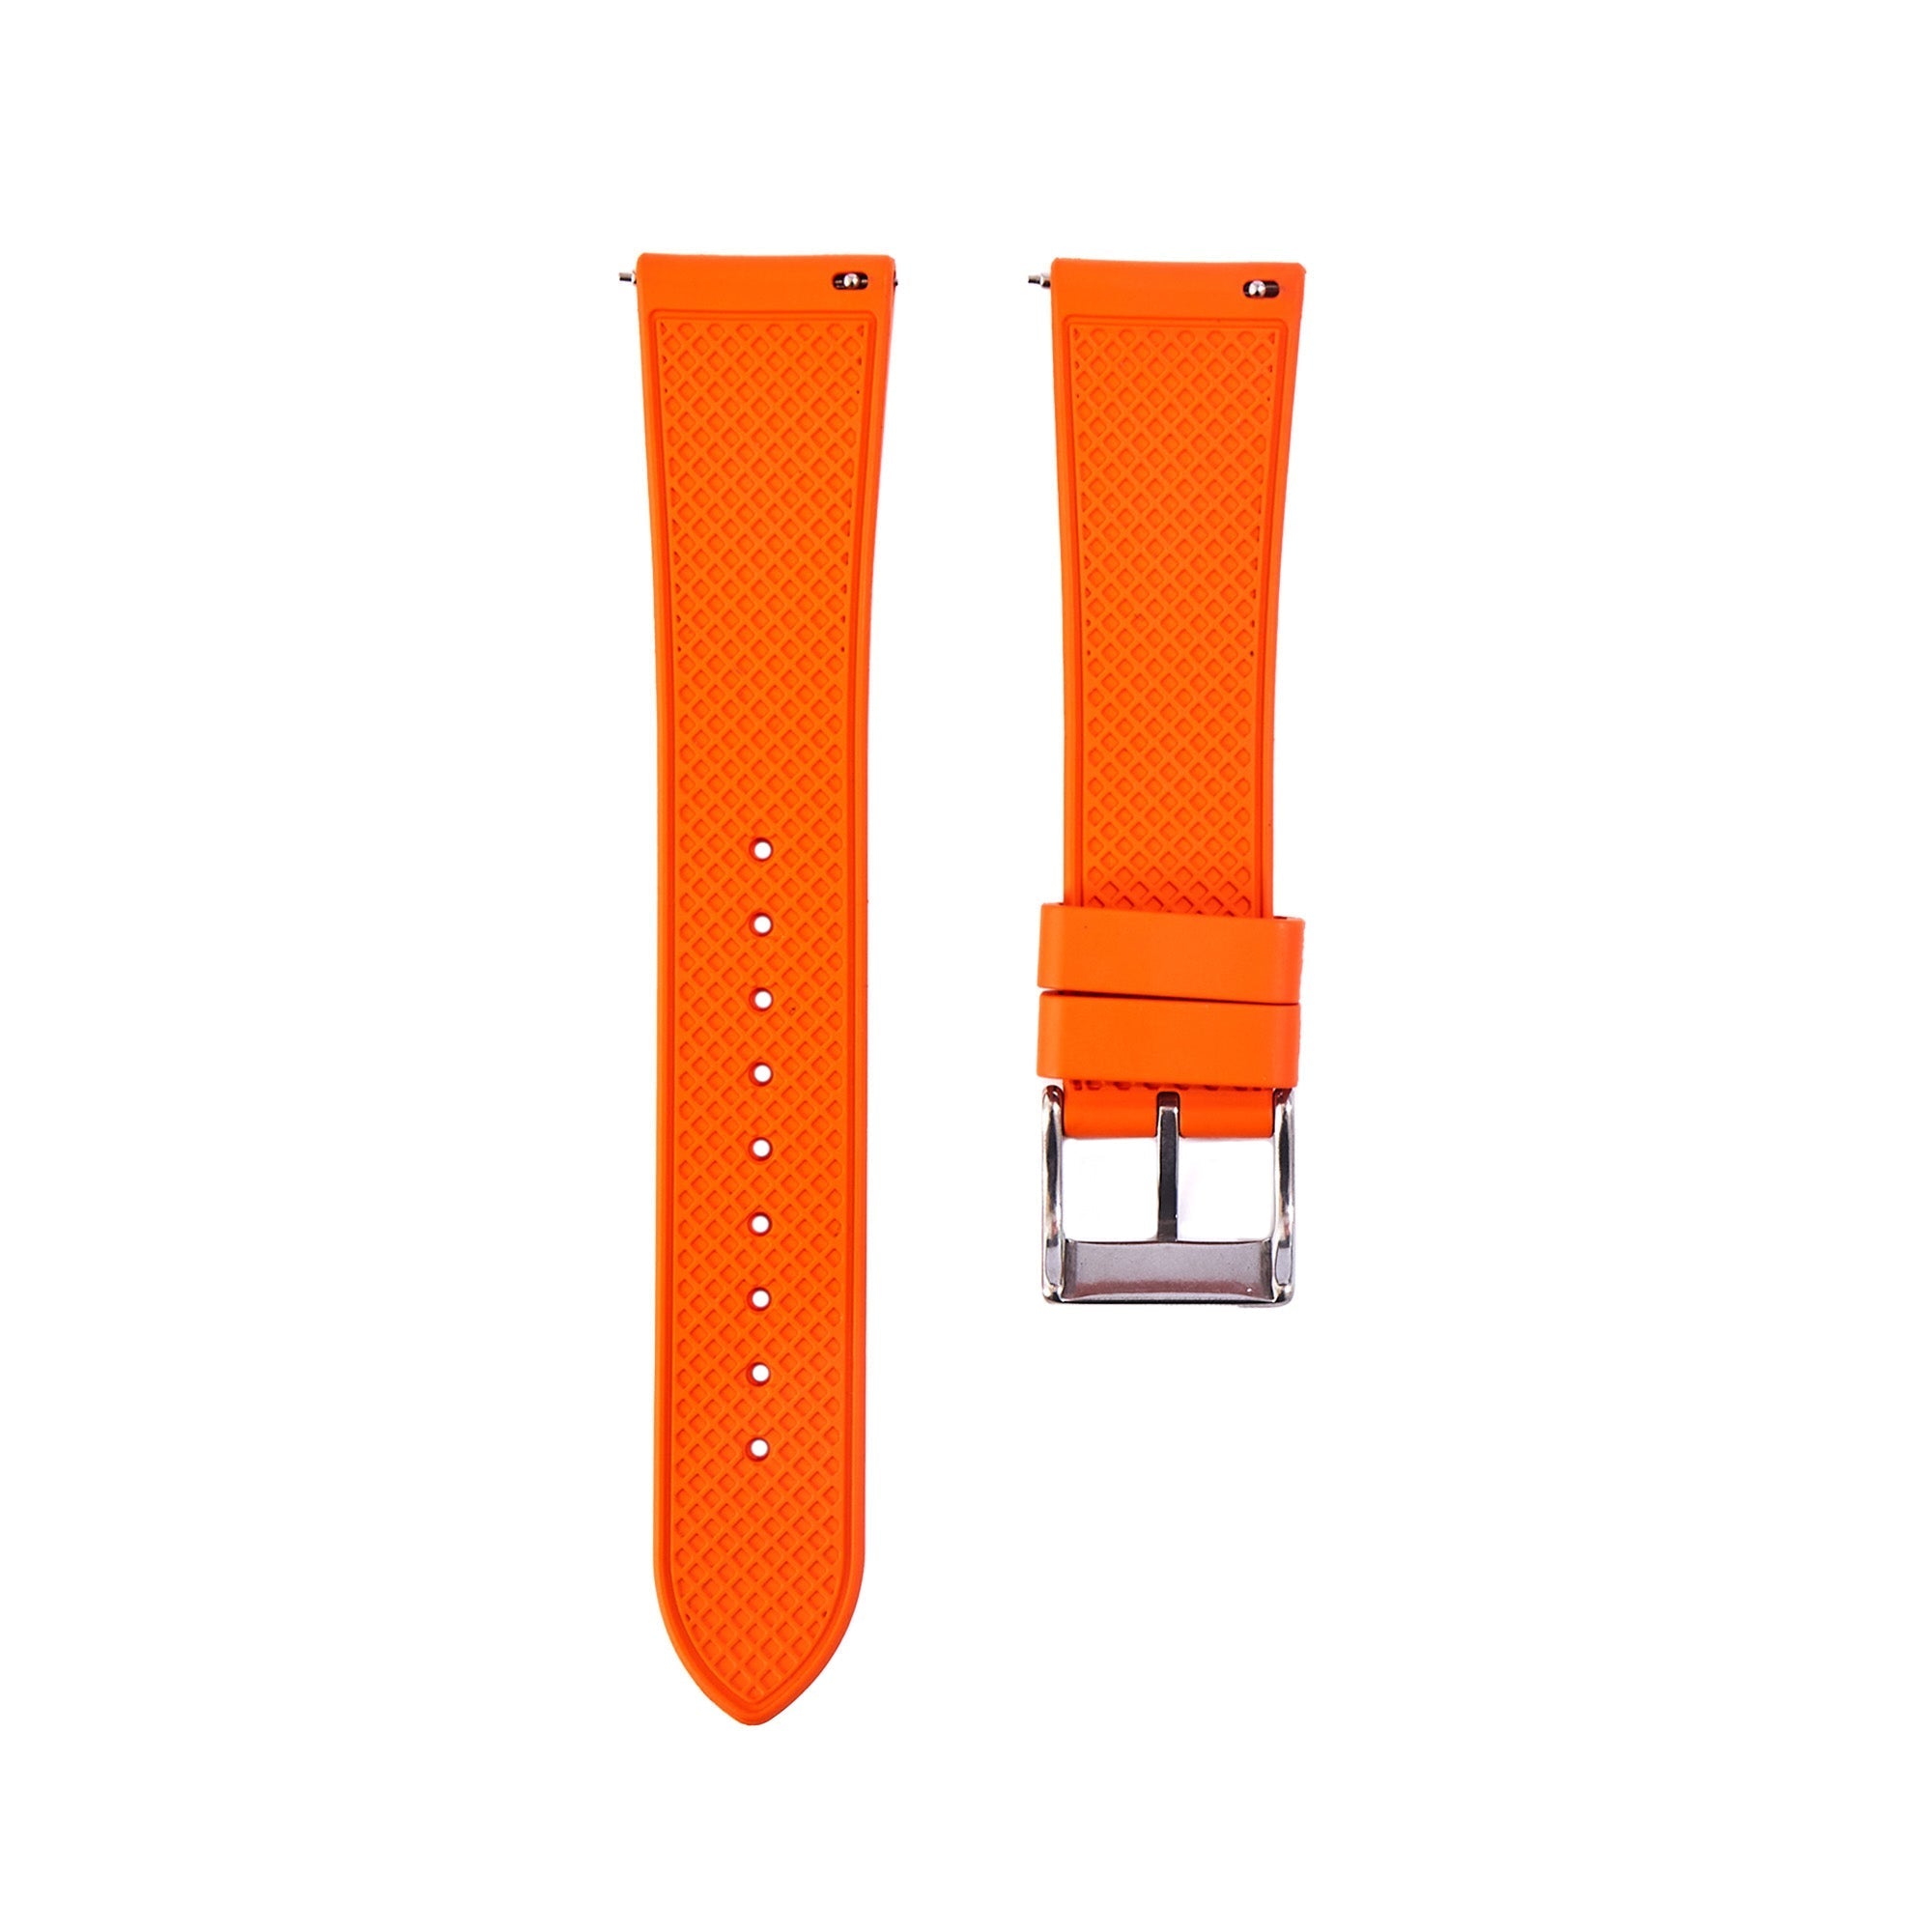 Grid FKM Rubber Strap - Quick-Release – Compatible with Blancpain x Swatch - Orange (2412) -StrapSeeker